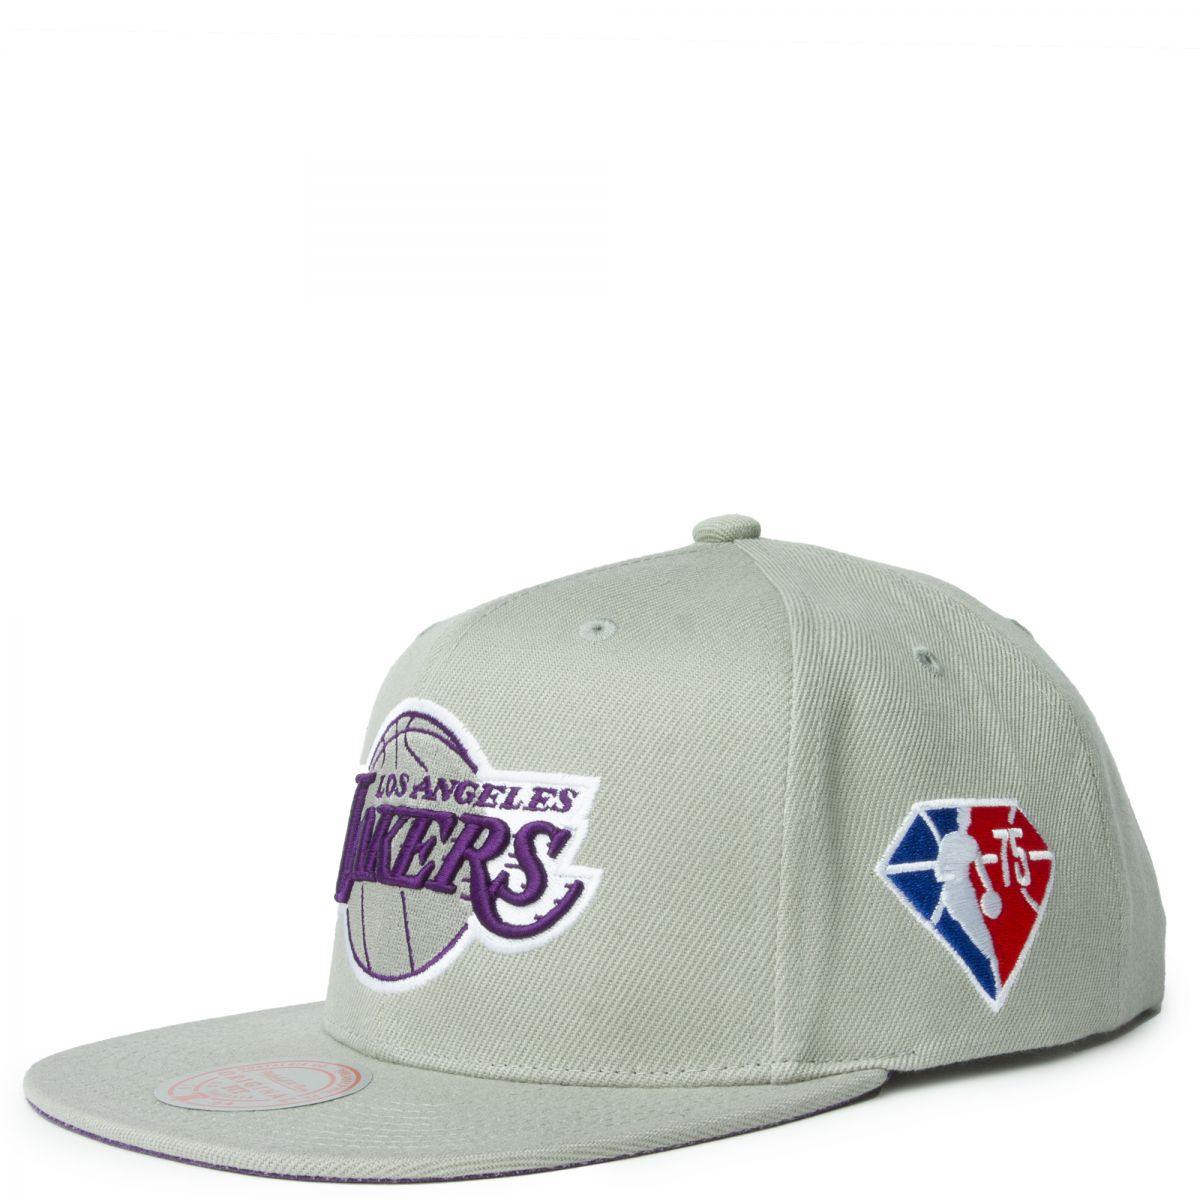 Culture Kings General Mitchell & Ness Los Angeles Lakers Cargo